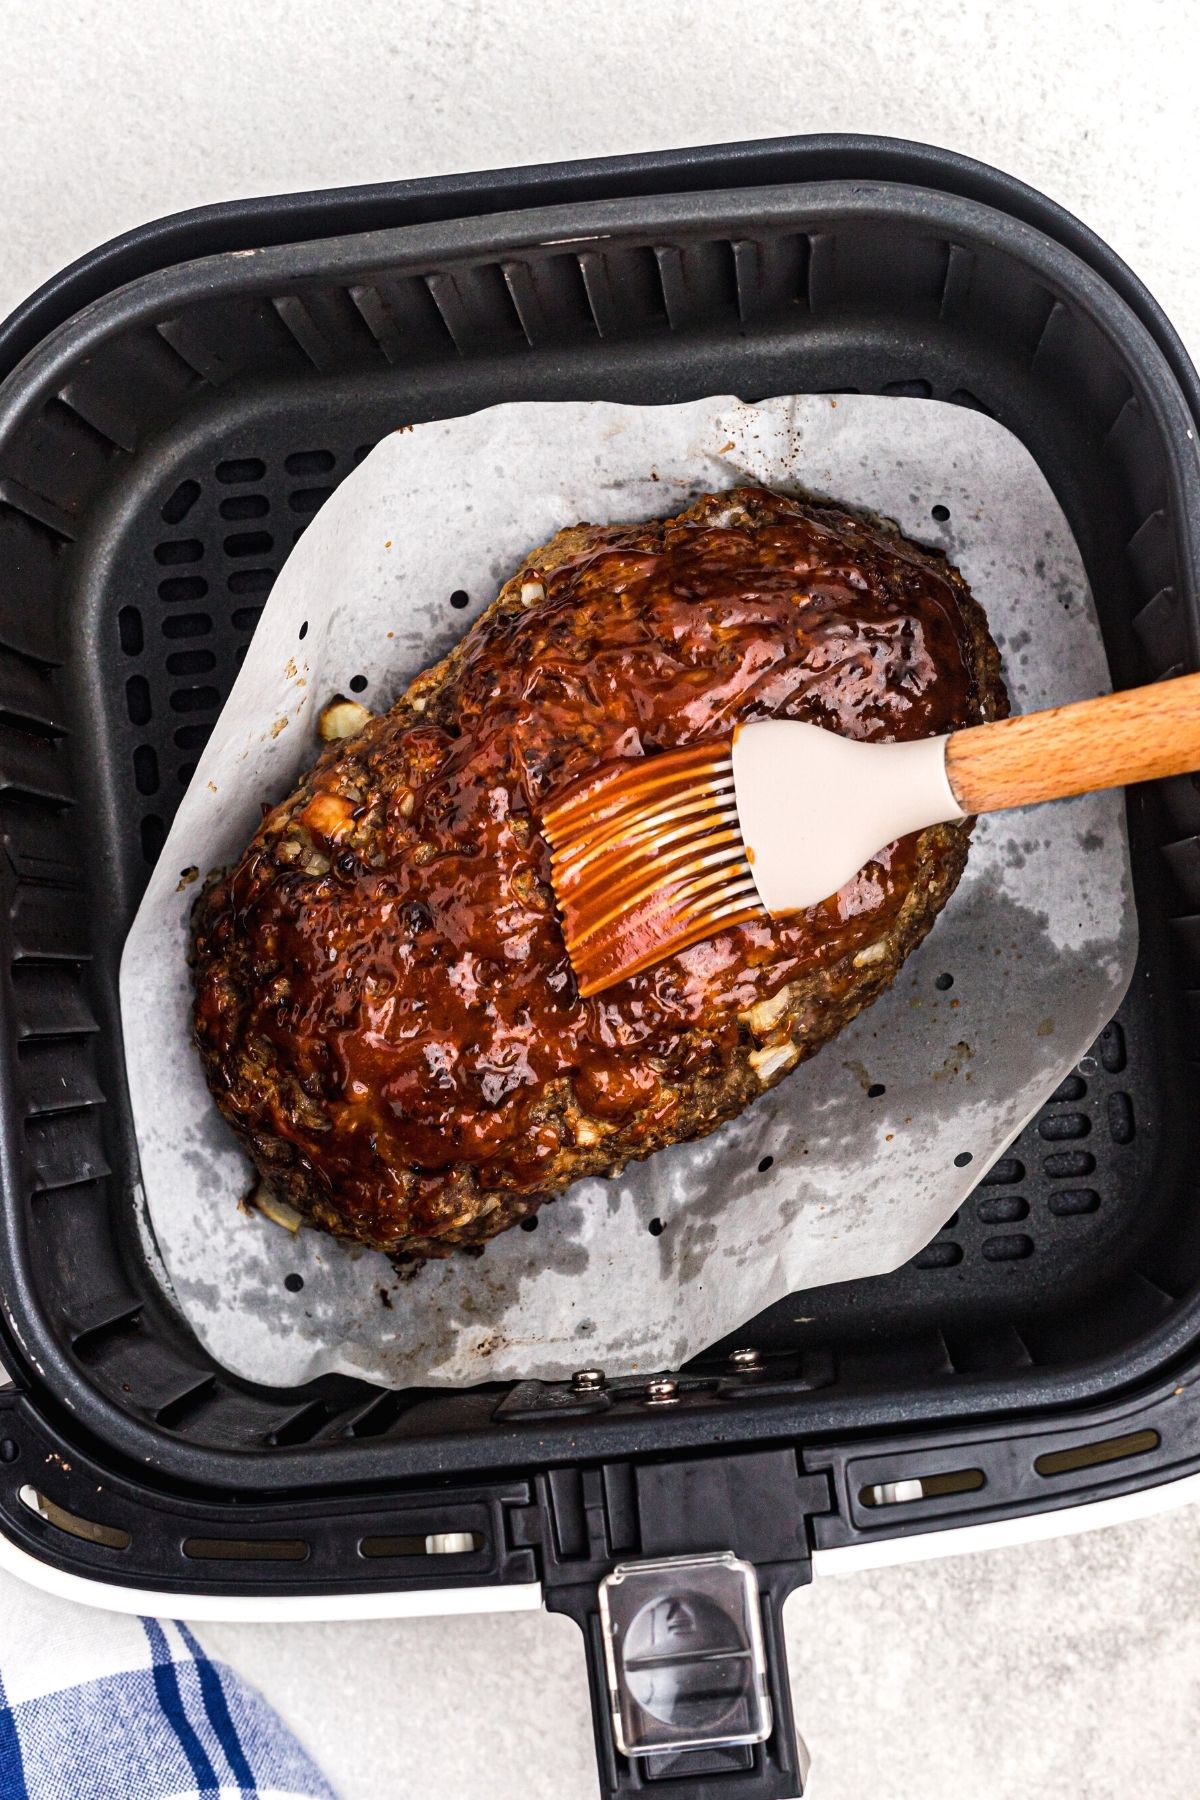 How To Cook A Meatloaf In An Air Fryer